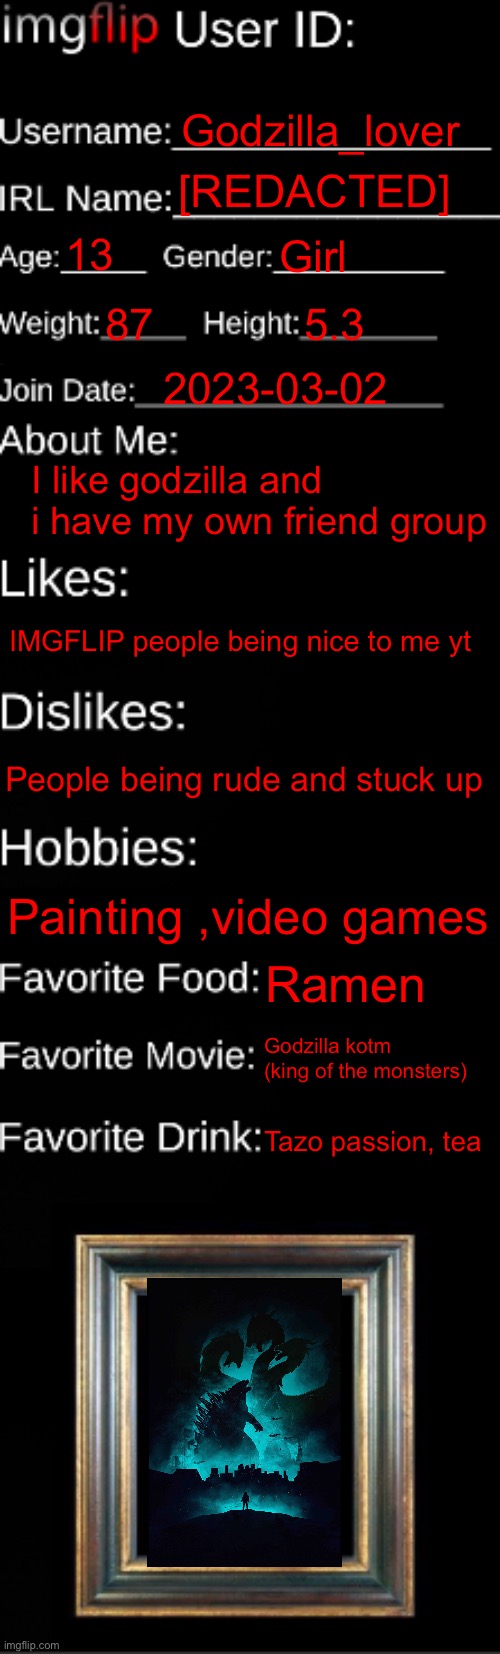 Here’s what im like | Godzilla_lover; [REDACTED]; 13; Girl; 87; 5.3; 2023-03-02; I like godzilla and i have my own friend group; IMGFLIP people being nice to me yt; People being rude and stuck up; Painting ,video games; Ramen; Godzilla kotm (king of the monsters); Tazo passion, tea | image tagged in imgflip id card | made w/ Imgflip meme maker